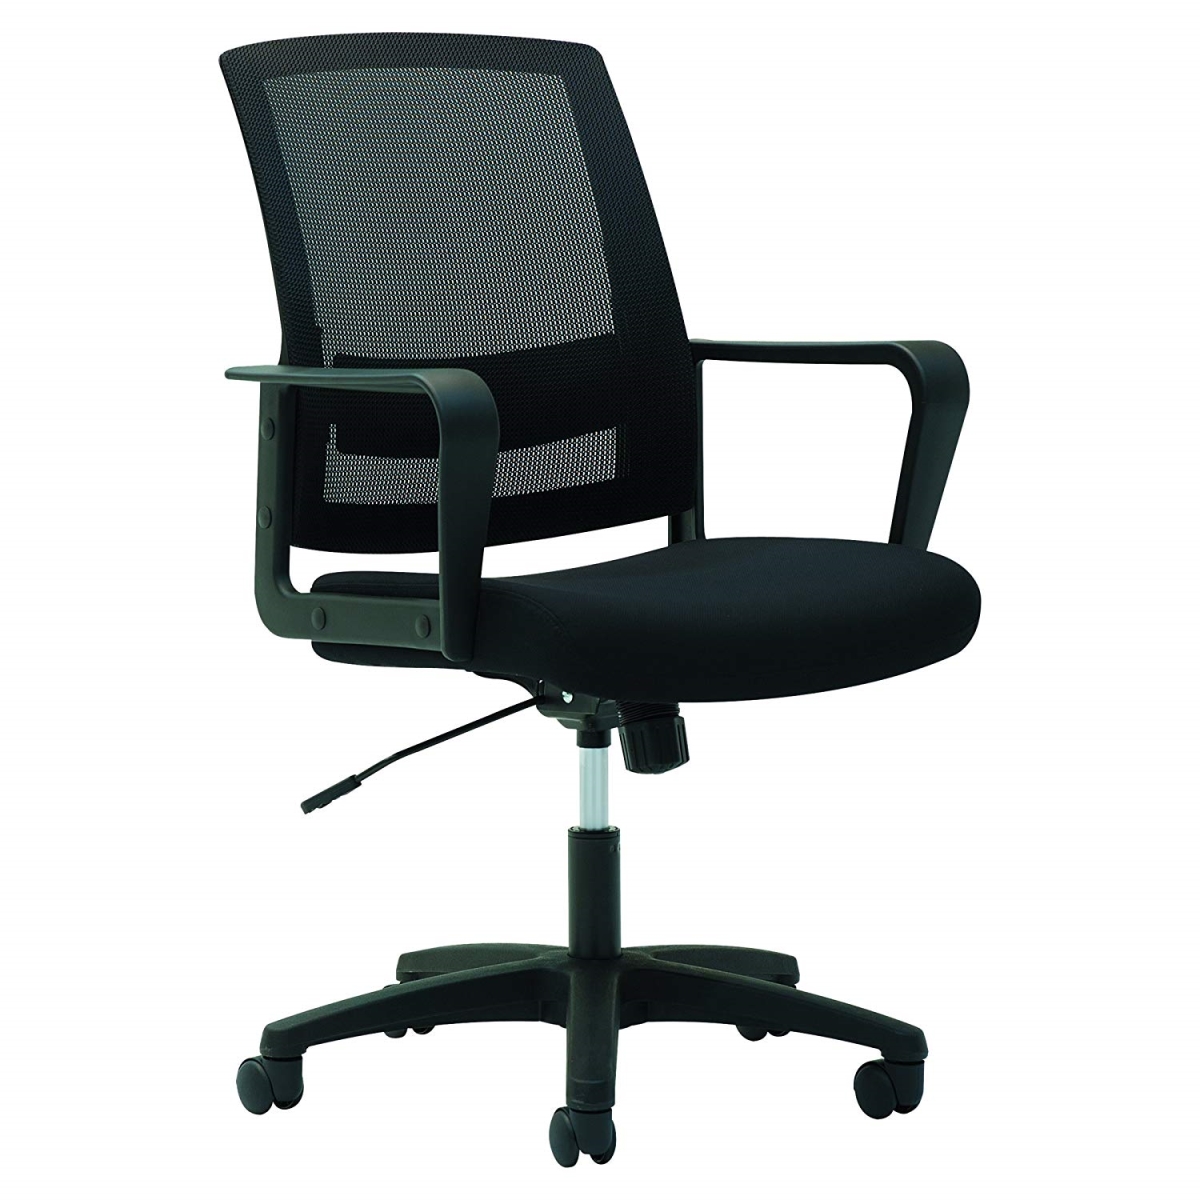 Ms4217 Mesh Mid-back Chair With Fixed Loop Arms, Black